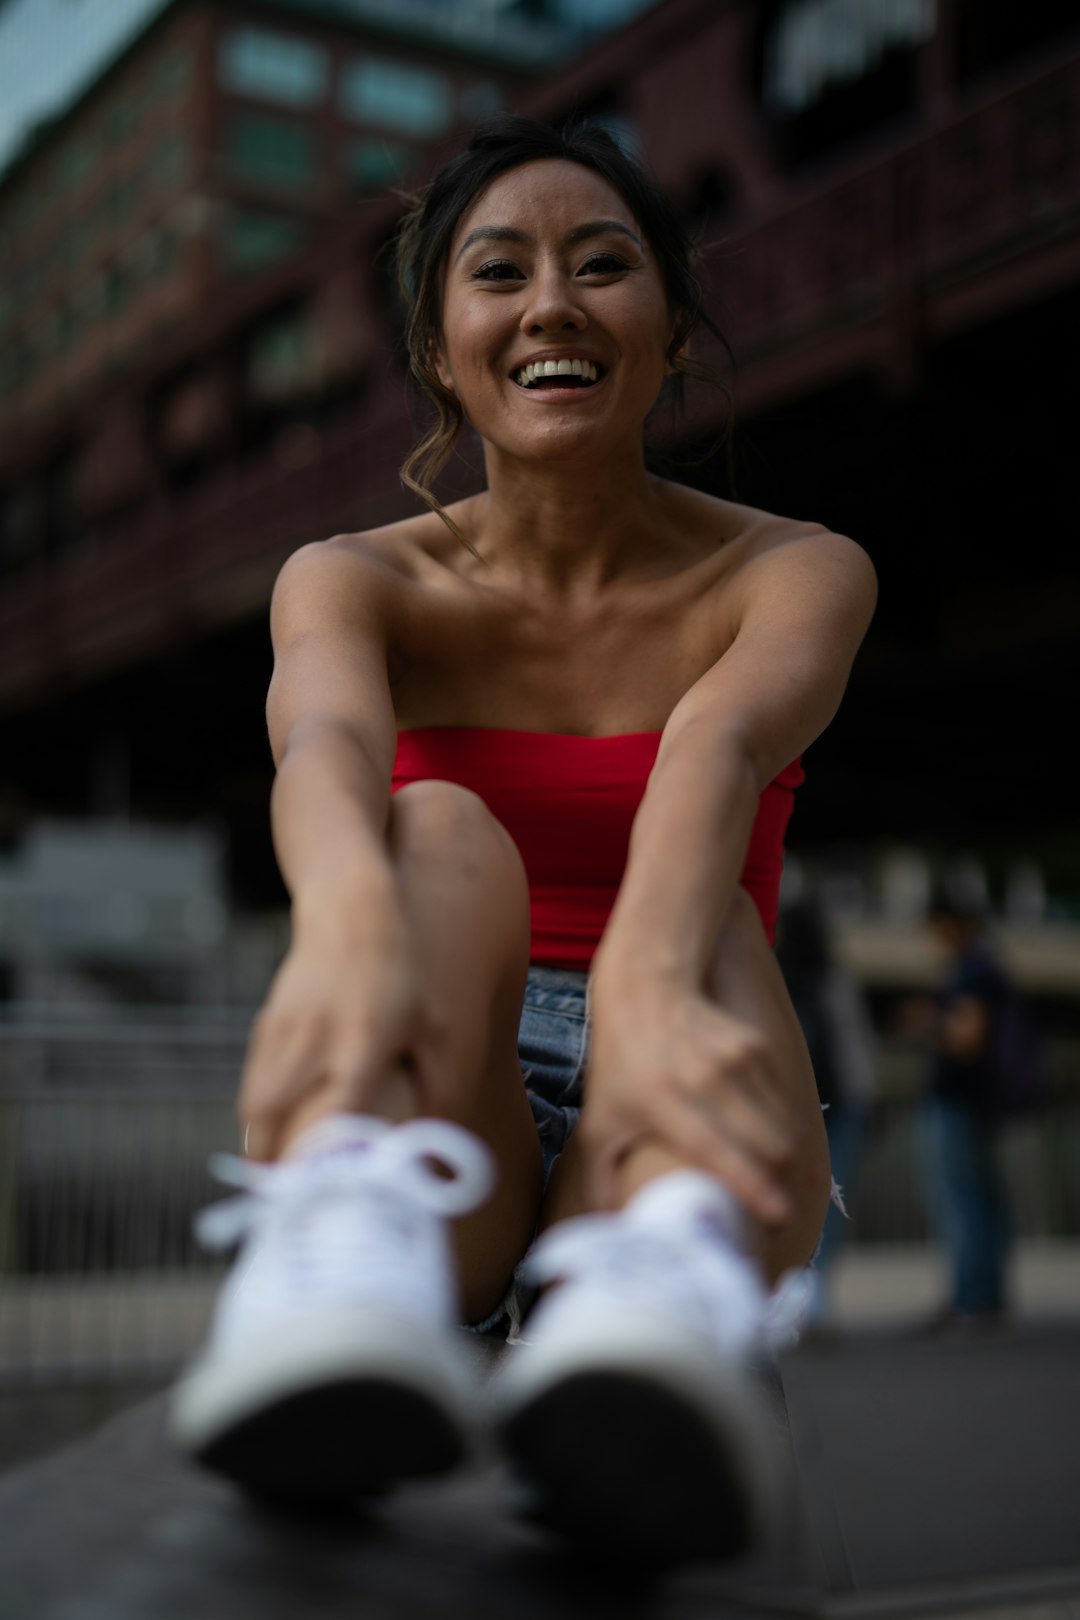 woman in red tube top and white sneakers reaching feet